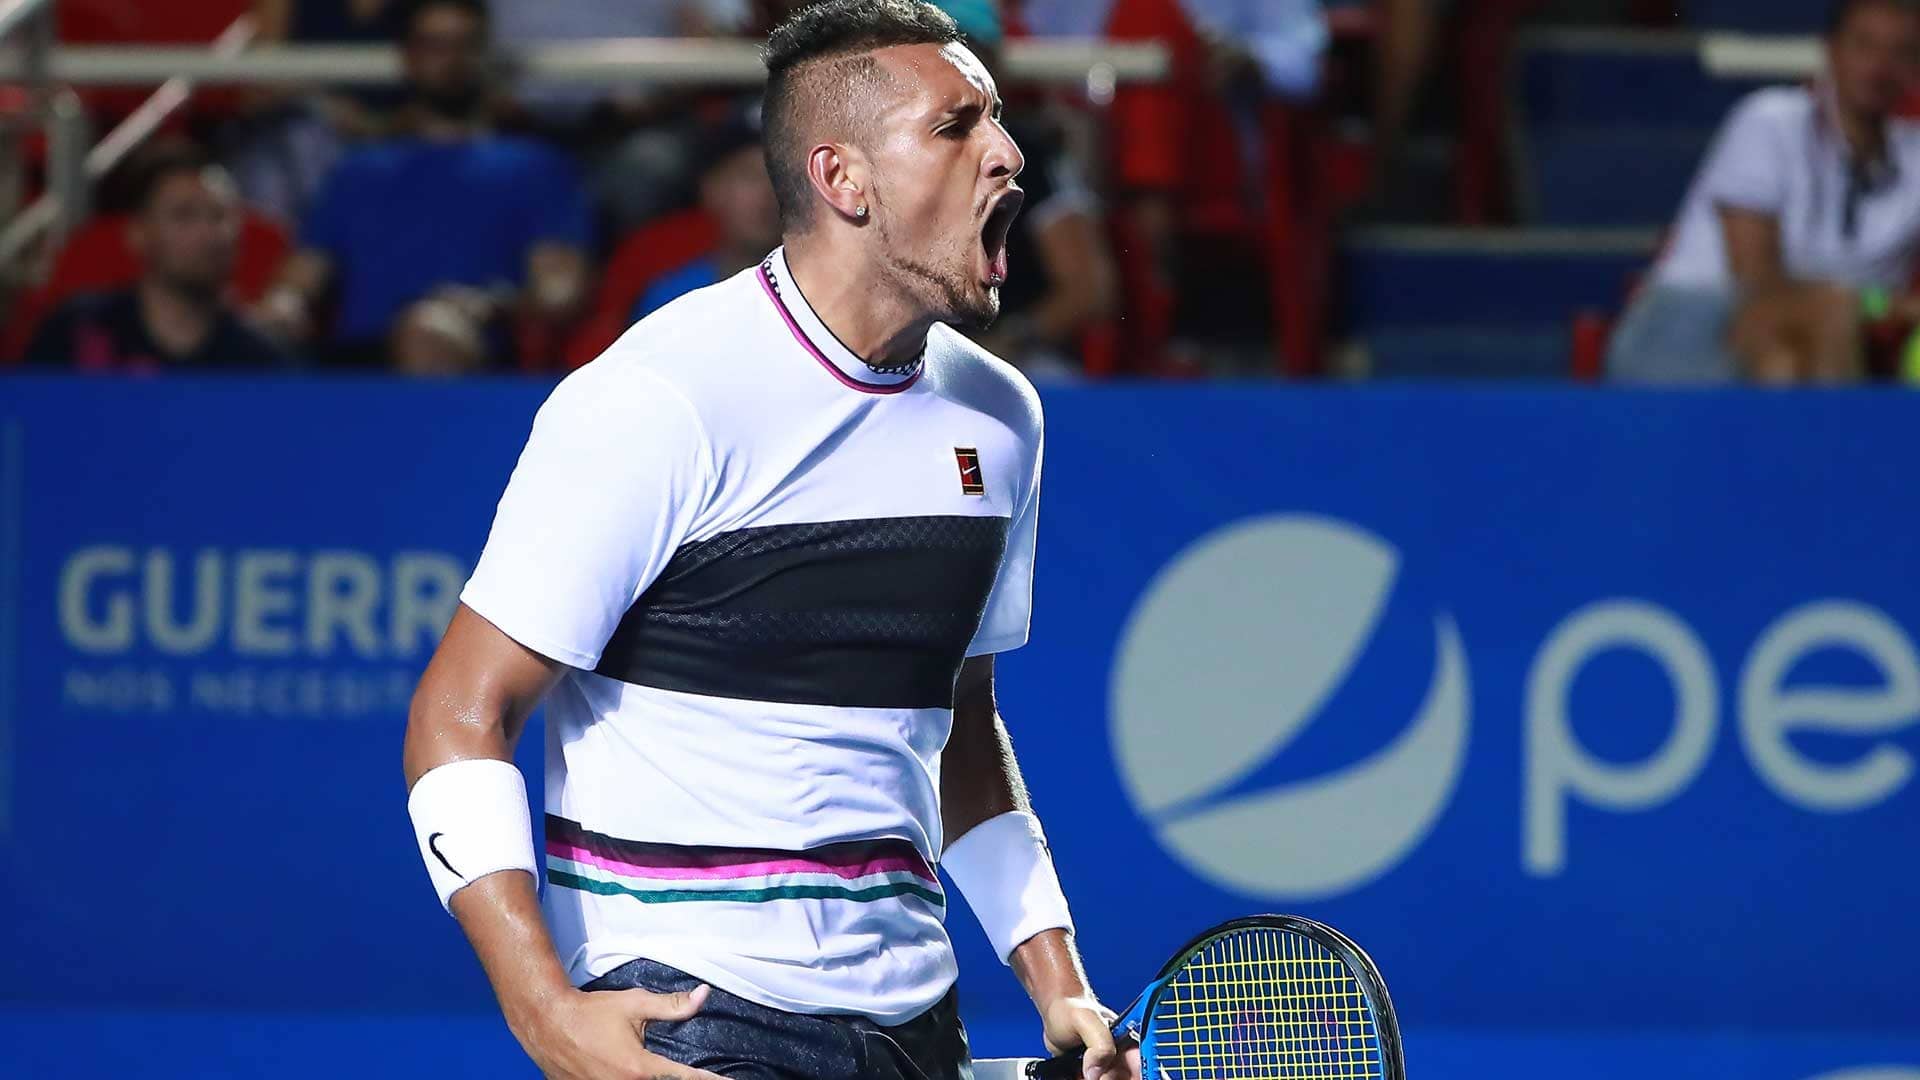 <a href='https://www.atptour.com/en/players/nick-kyrgios/ke17/overview'>Nick Kyrgios</a> reacts in his quarter-final vs. <a href='https://www.atptour.com/en/players/stan-wawrinka/w367/overview'>Stan Wawrinka</a> in Acapulco